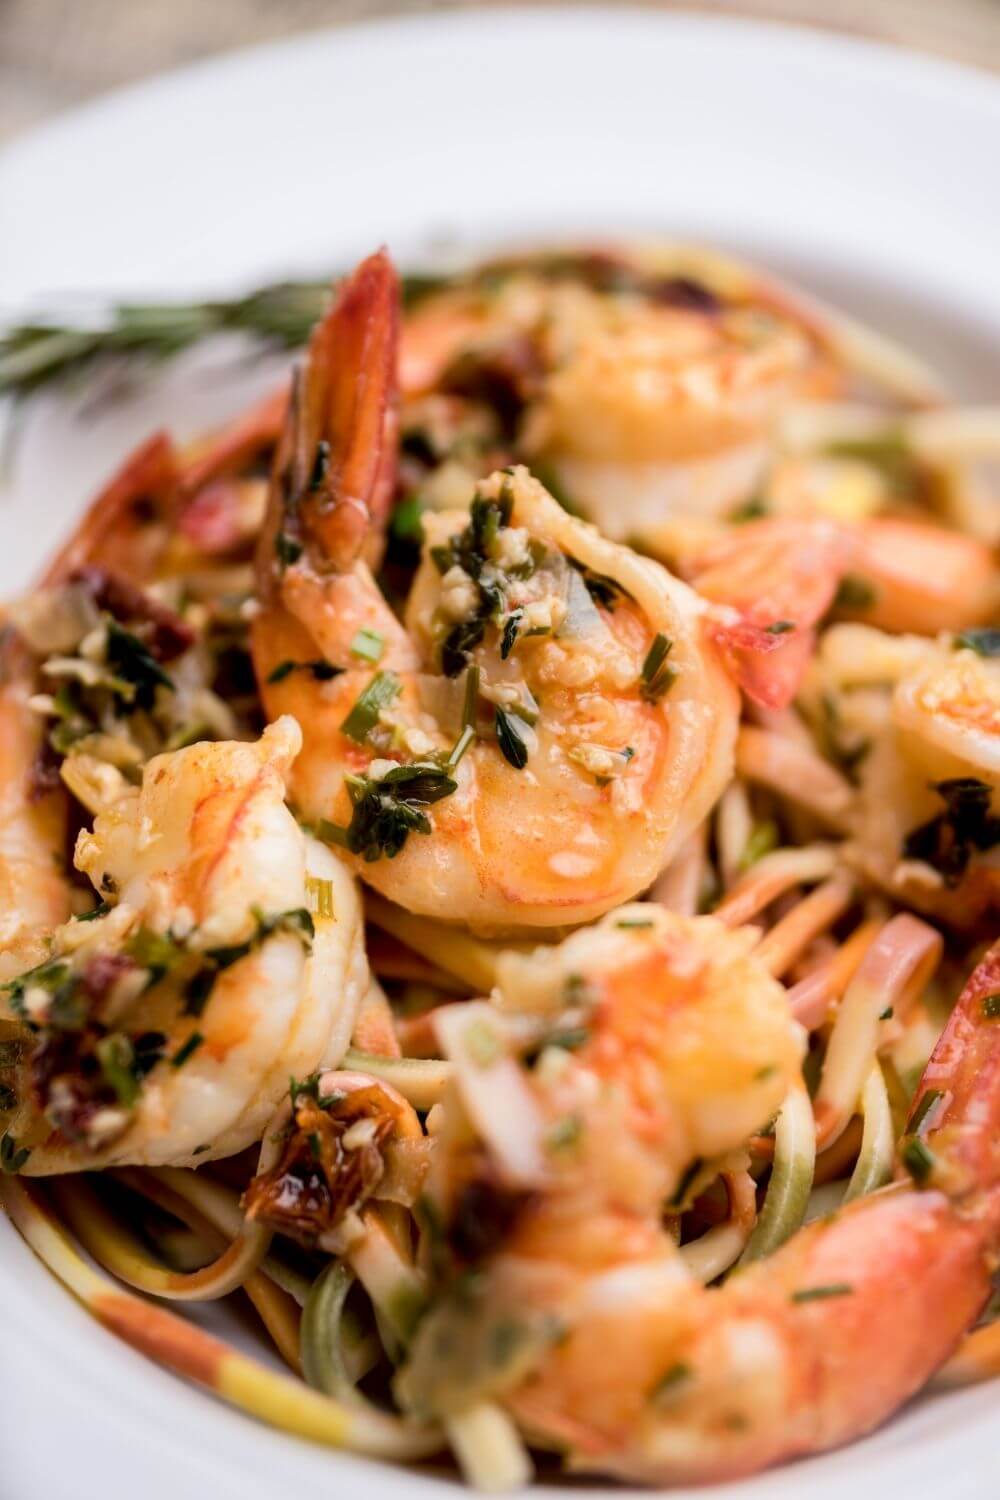 What To Serve With Shrimp Scampi